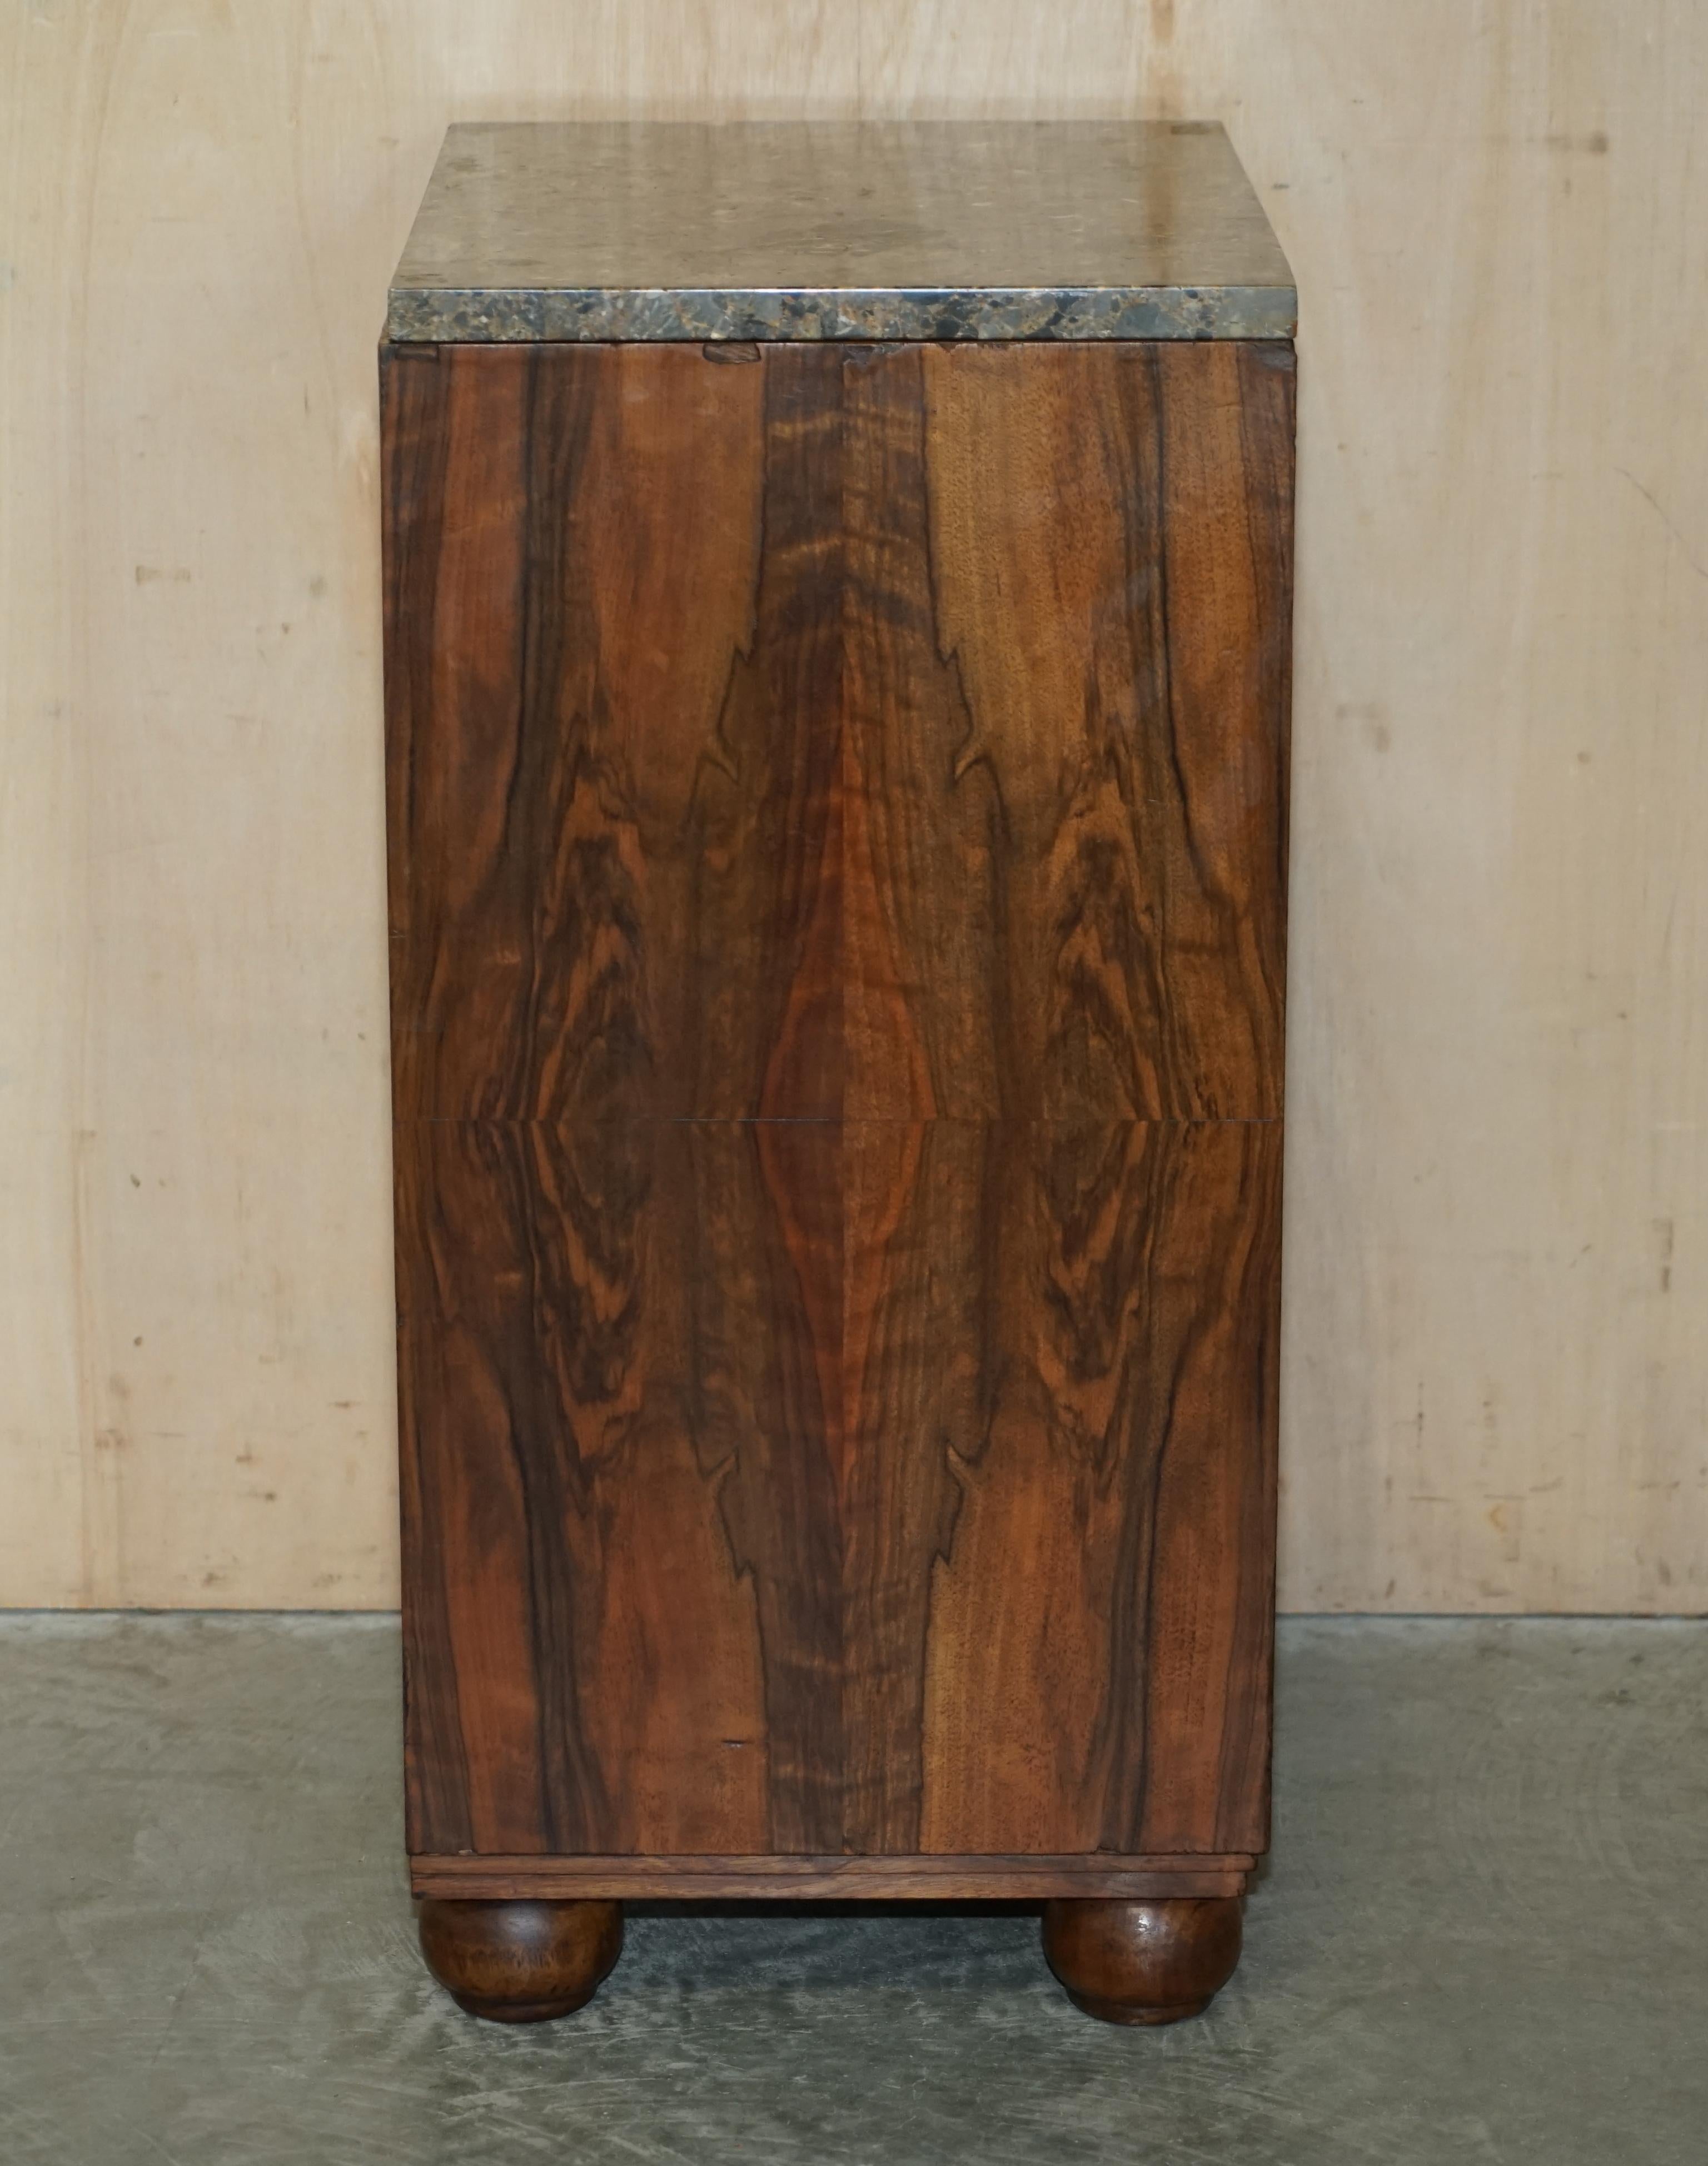 Pair of 1920s Art Deco Hardwood & Marble Bedside Nightstands Side Lamp Tables For Sale 10